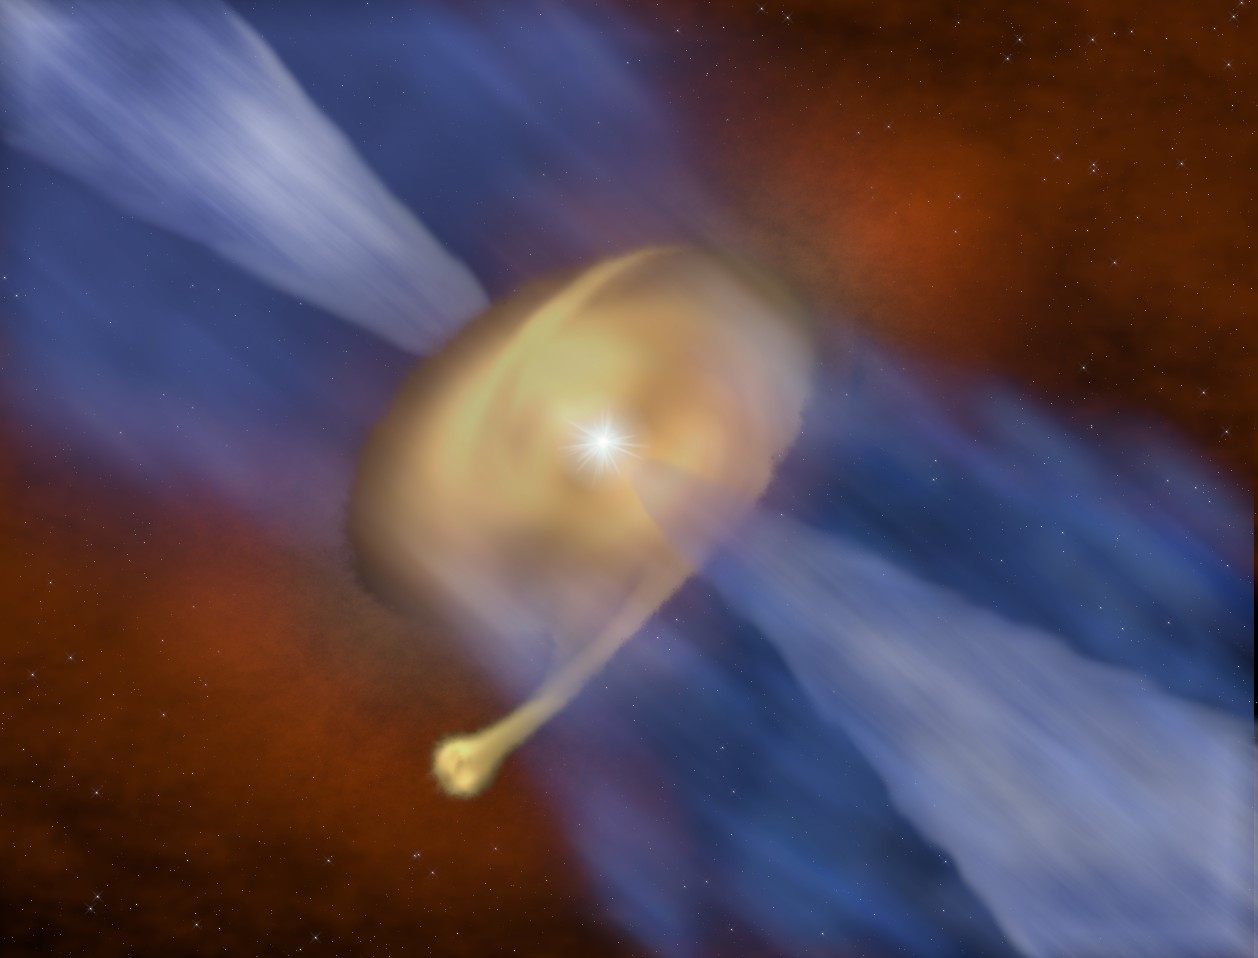 <p>Artists impression of the disk of dust and gas surrounding the massive protostar MM 1a, with its companion MM 1b forming in the outer regions. Credit: J. D. Ilee / University of Leeds.</p>
